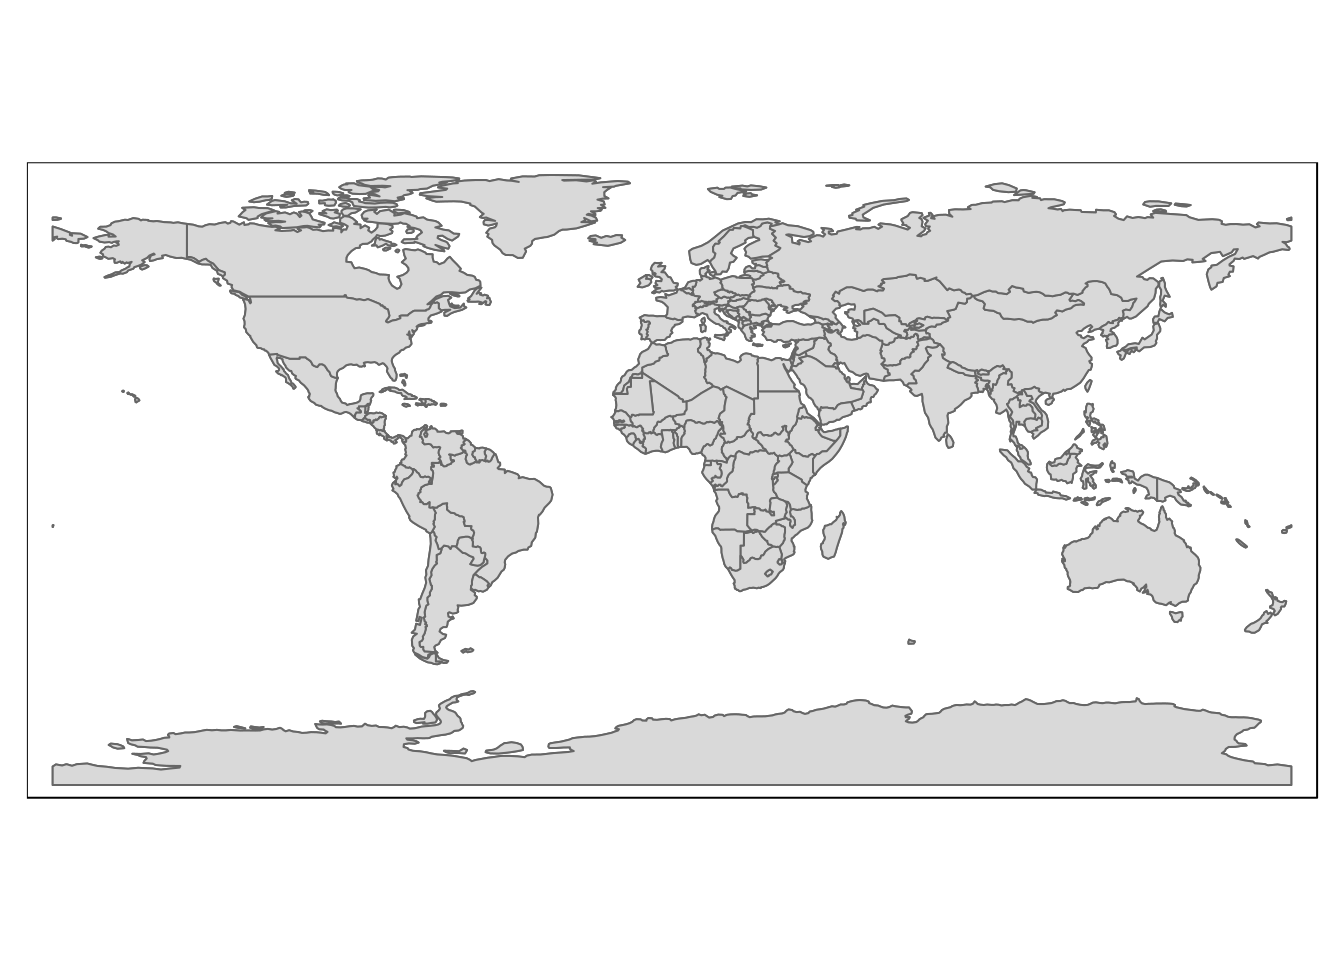 The nat_earth_countries table loaded into R and visualised using the quick map function from tmap.